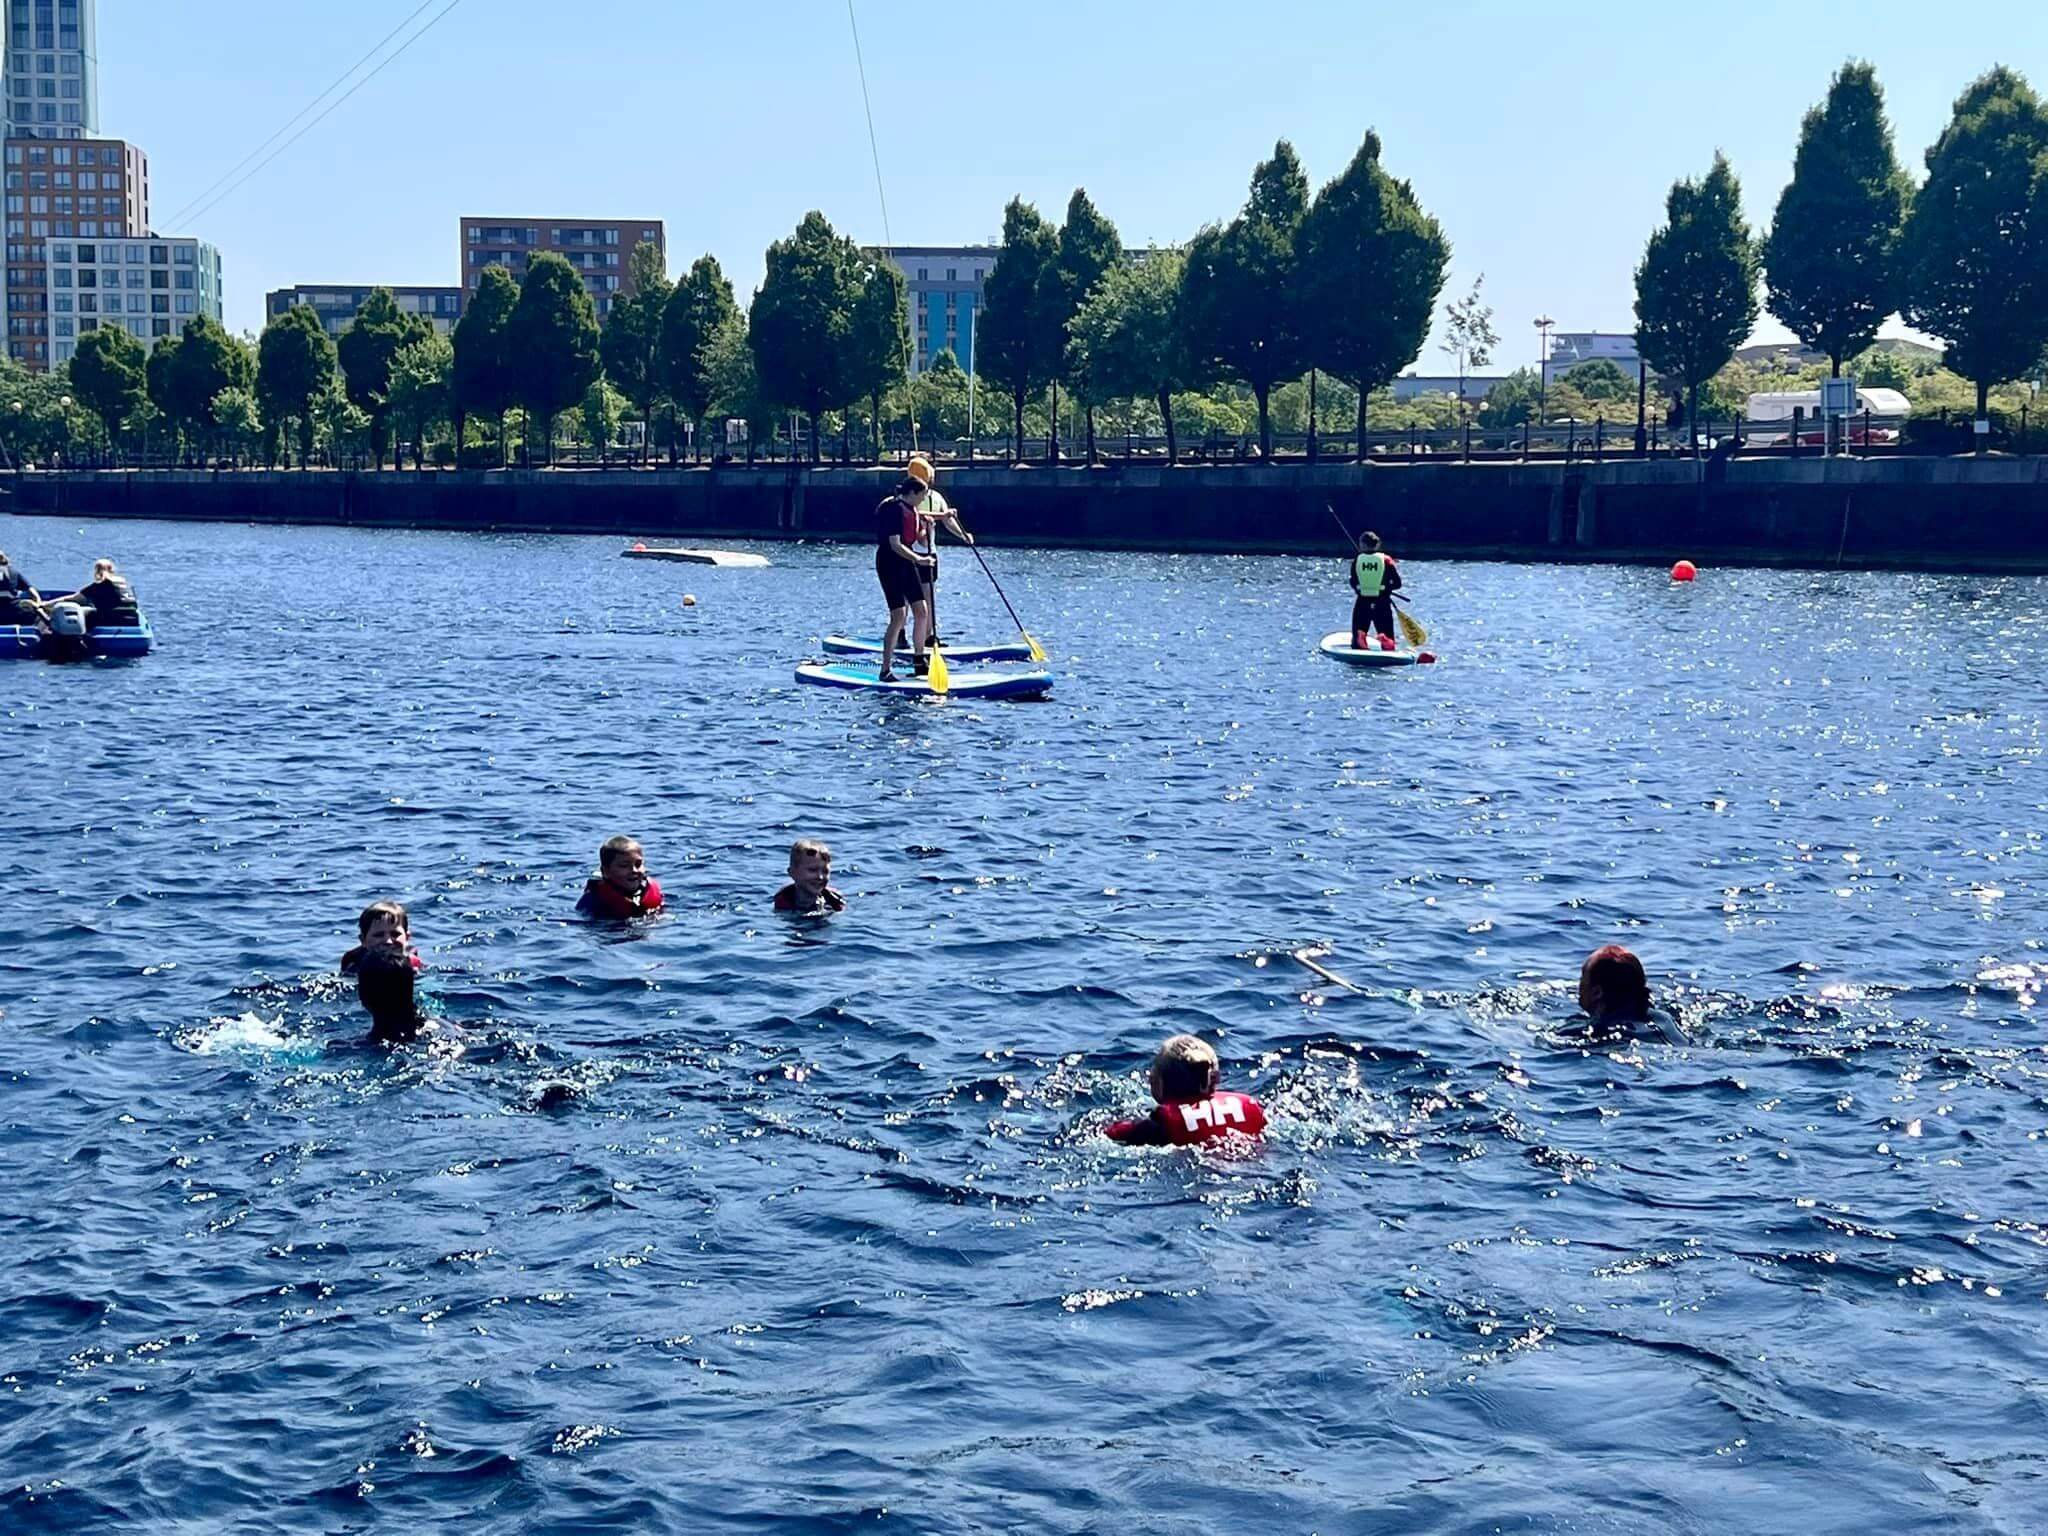 People paddle boarding at Salford Quays, Salford, Manchester 